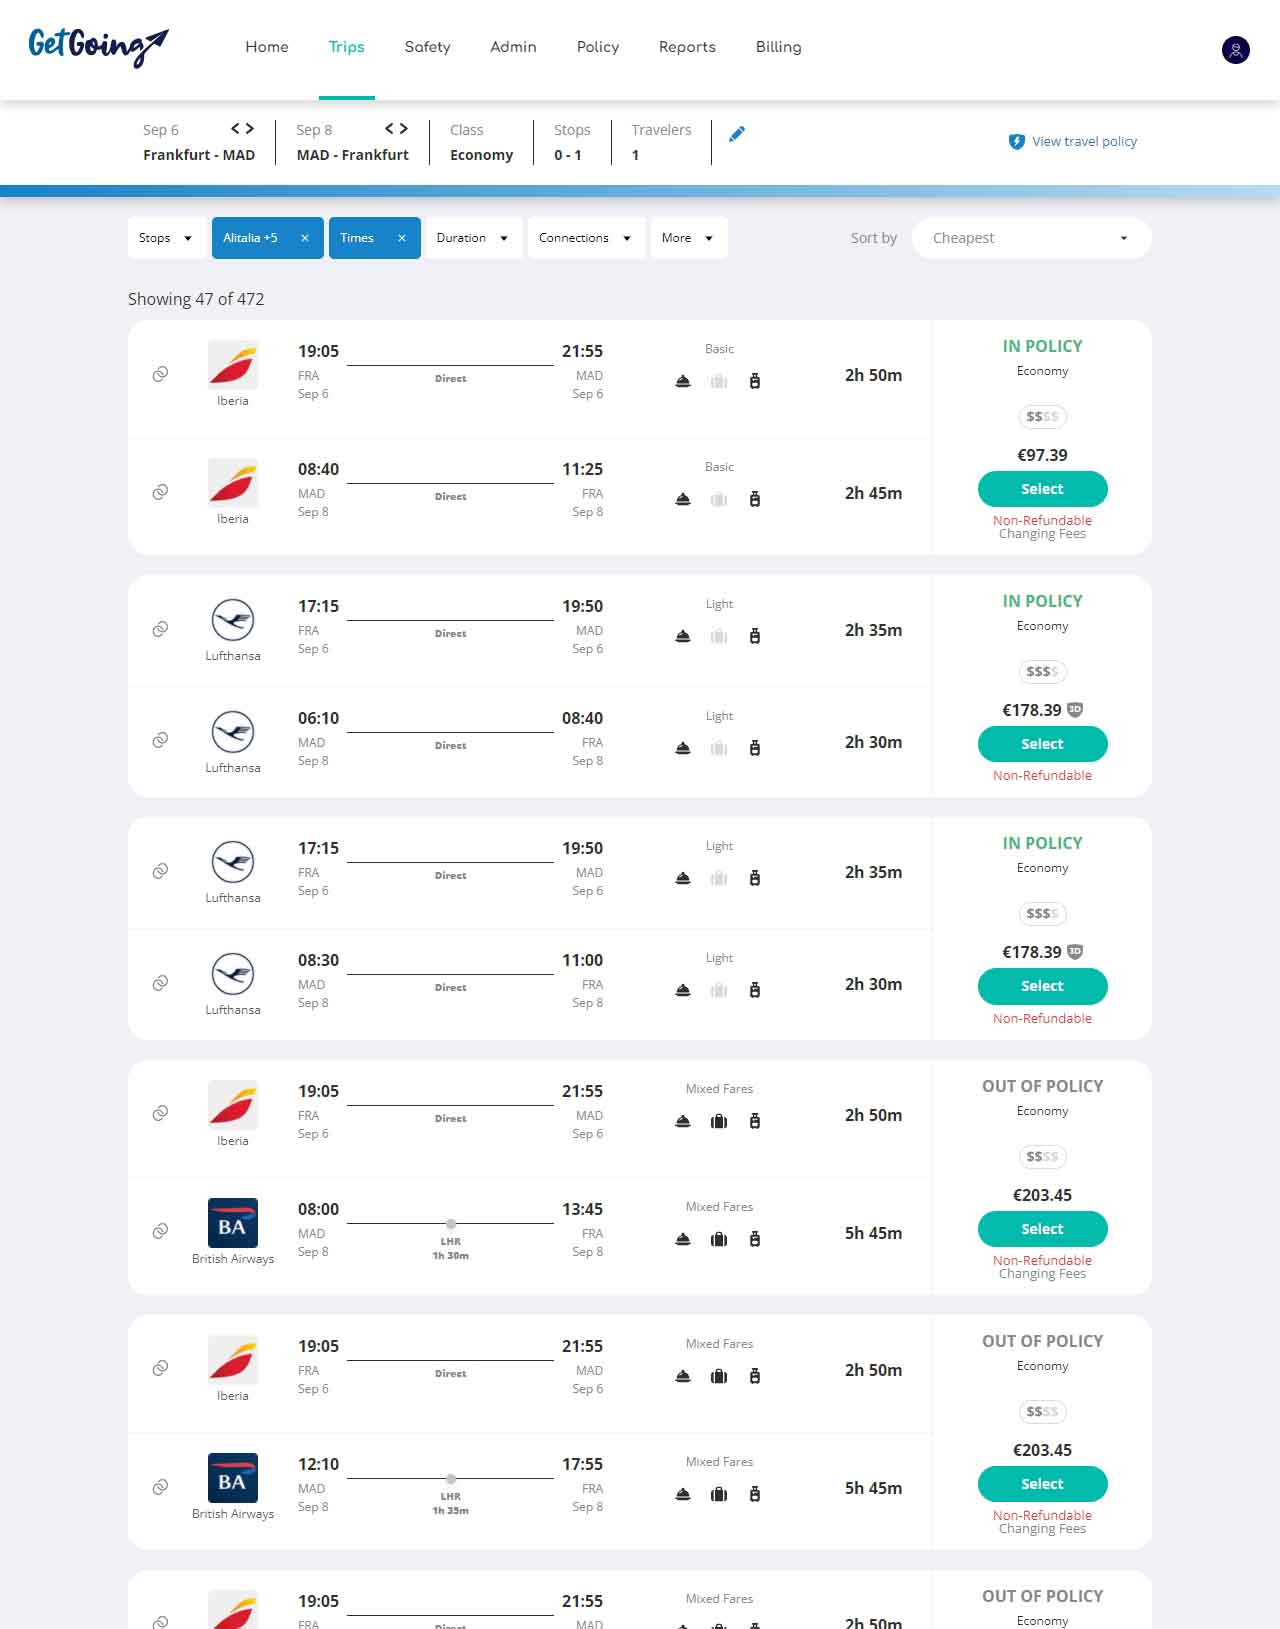 Pick from millions of discounted travel deals on GetGoing